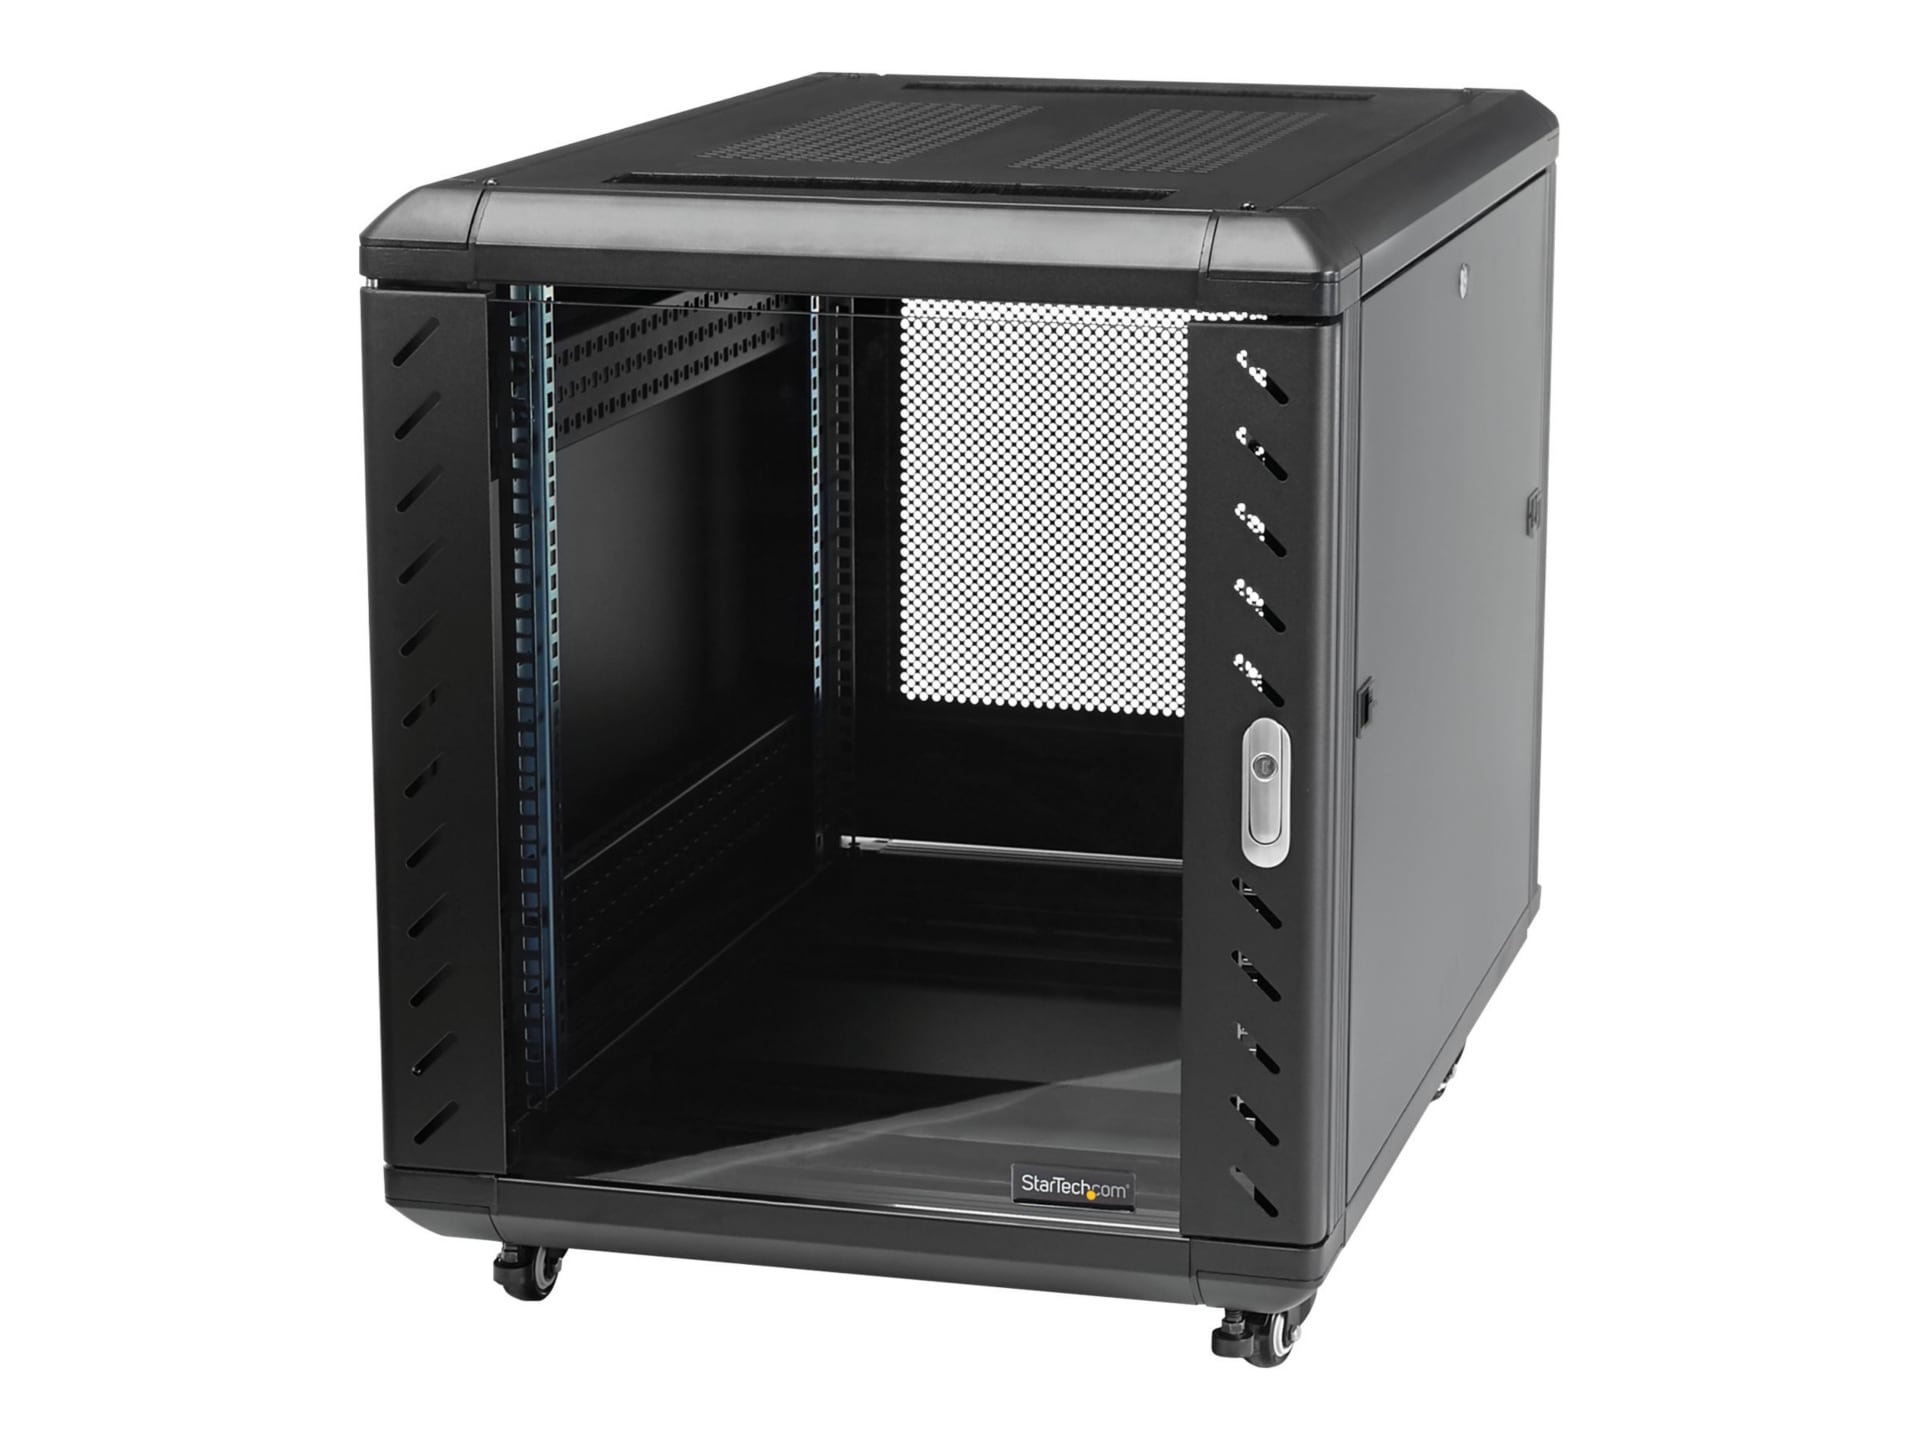 StarTech.com 12U 36in Knock-Down Server Rack Cabinet with Casters